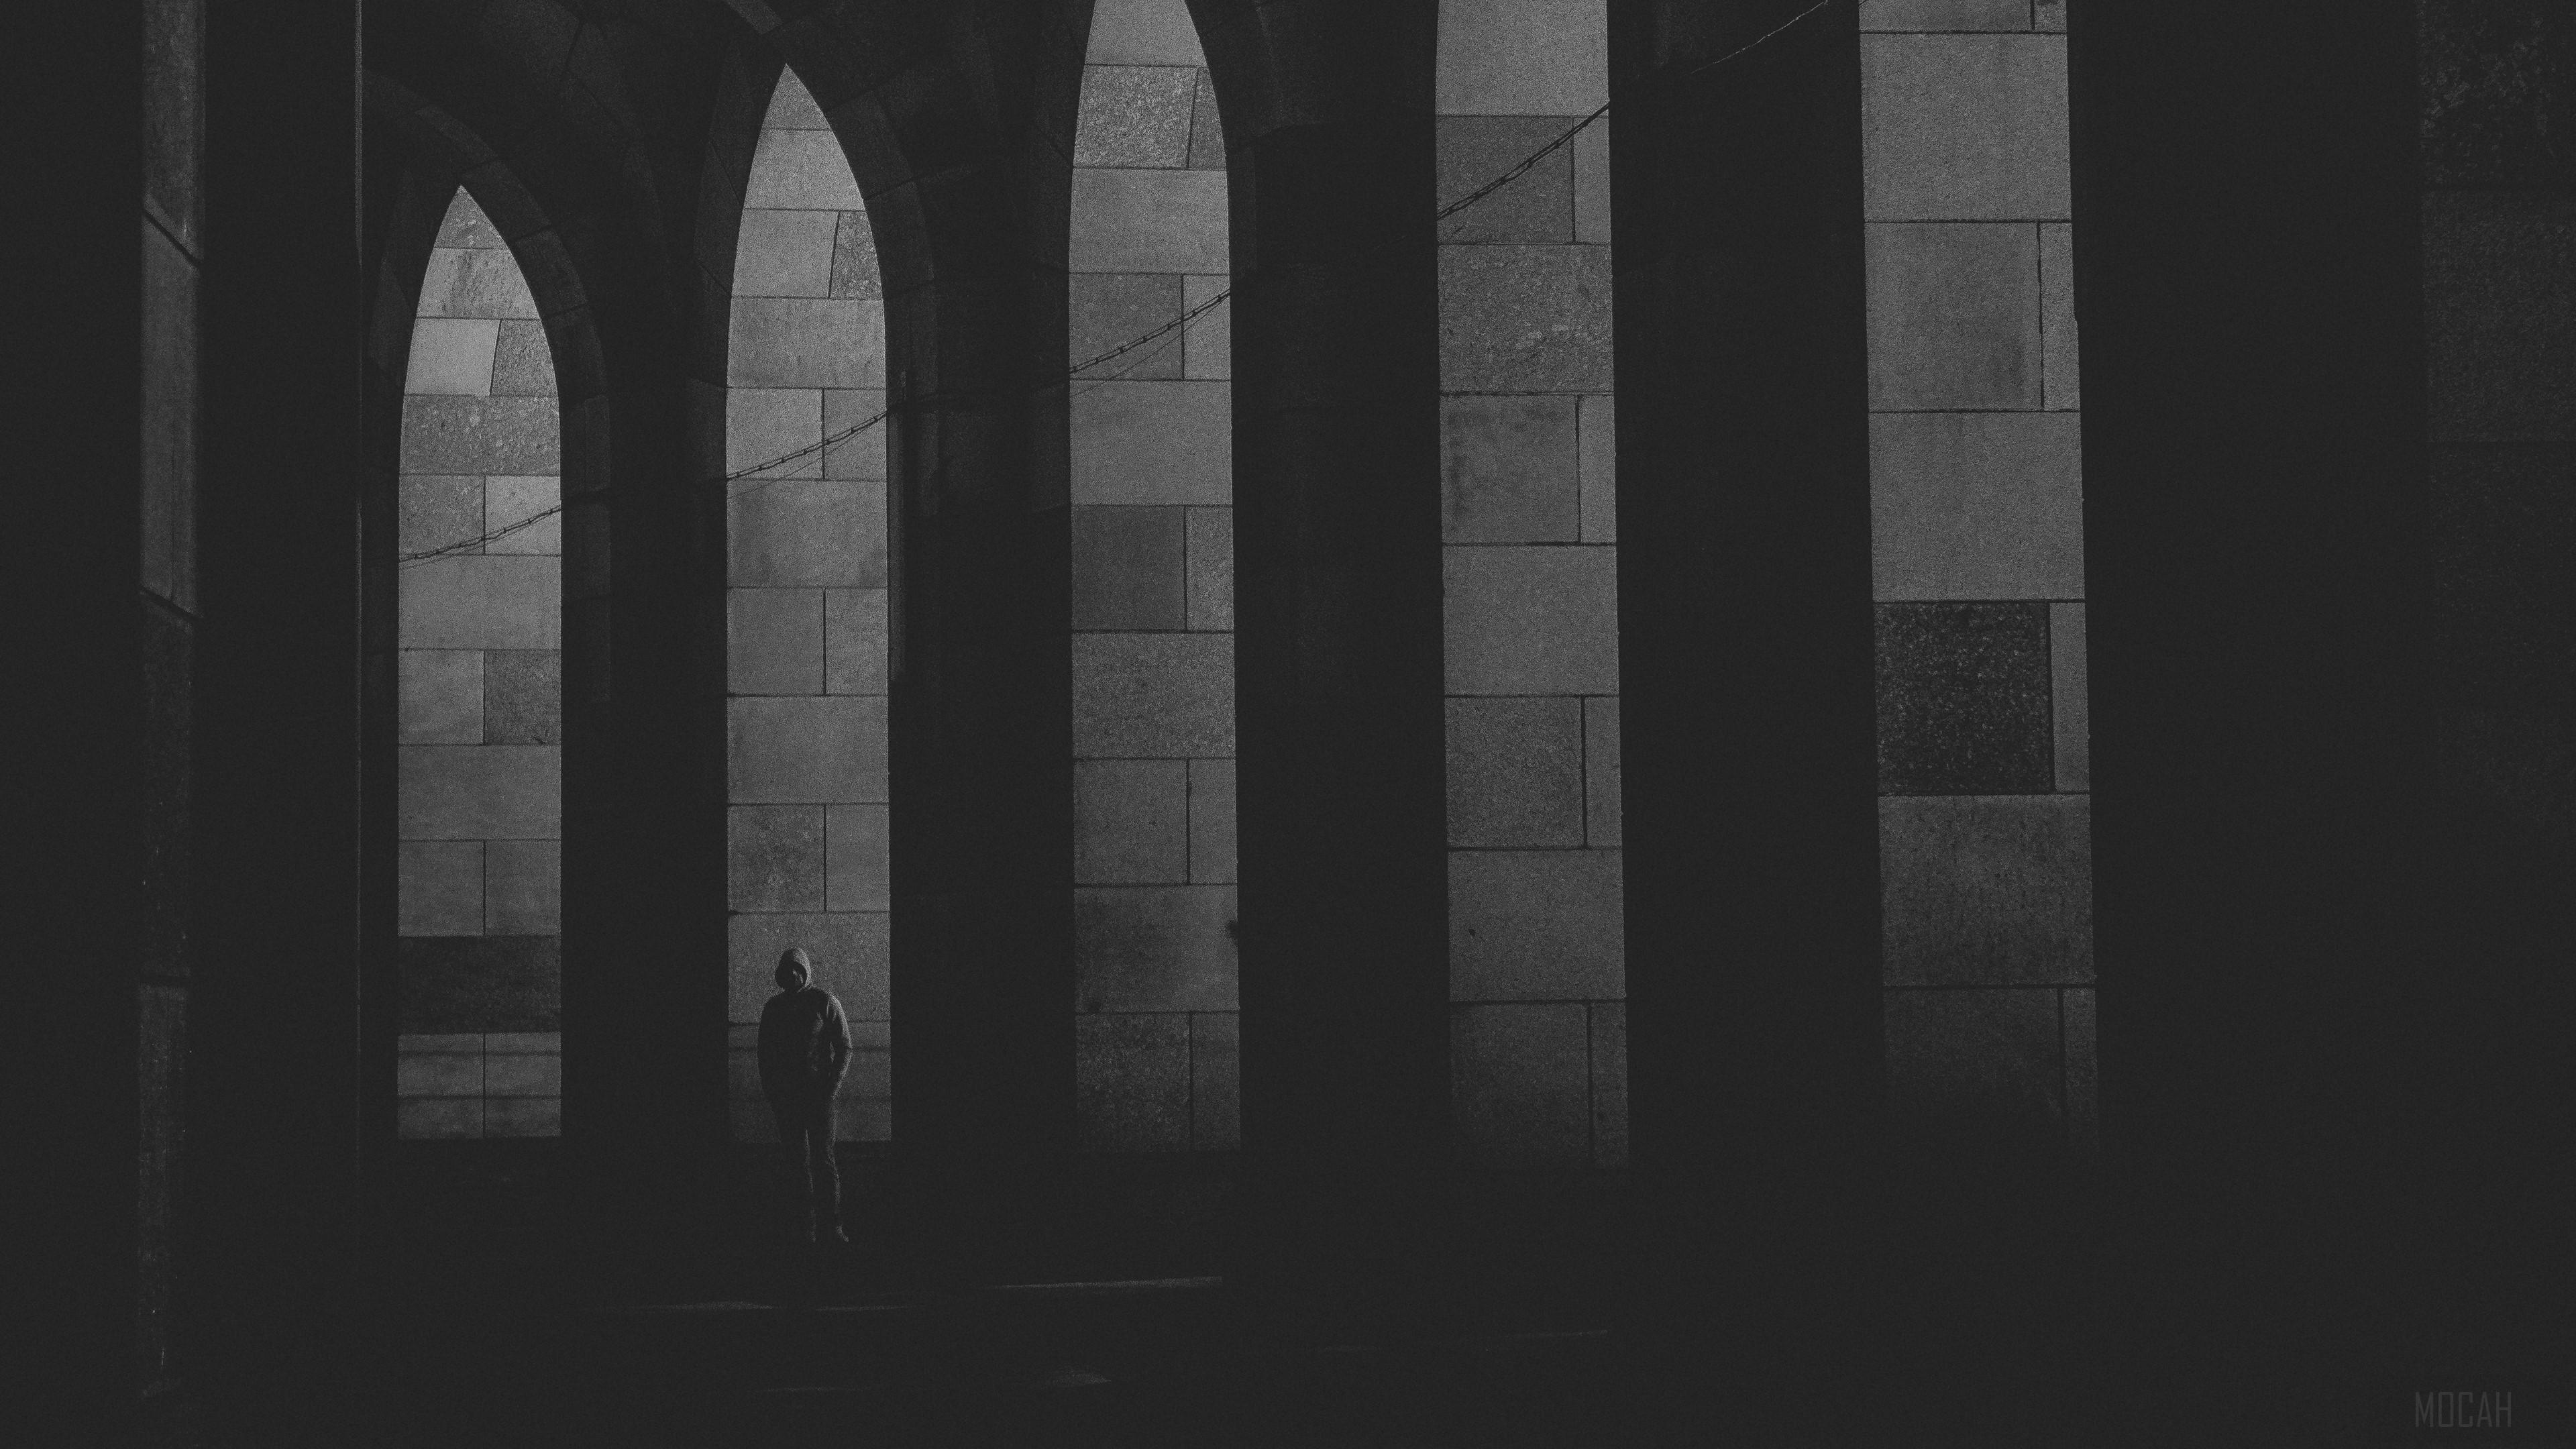 HD wallpaper, Bw, Loneliness 4K, Lonely, Arches